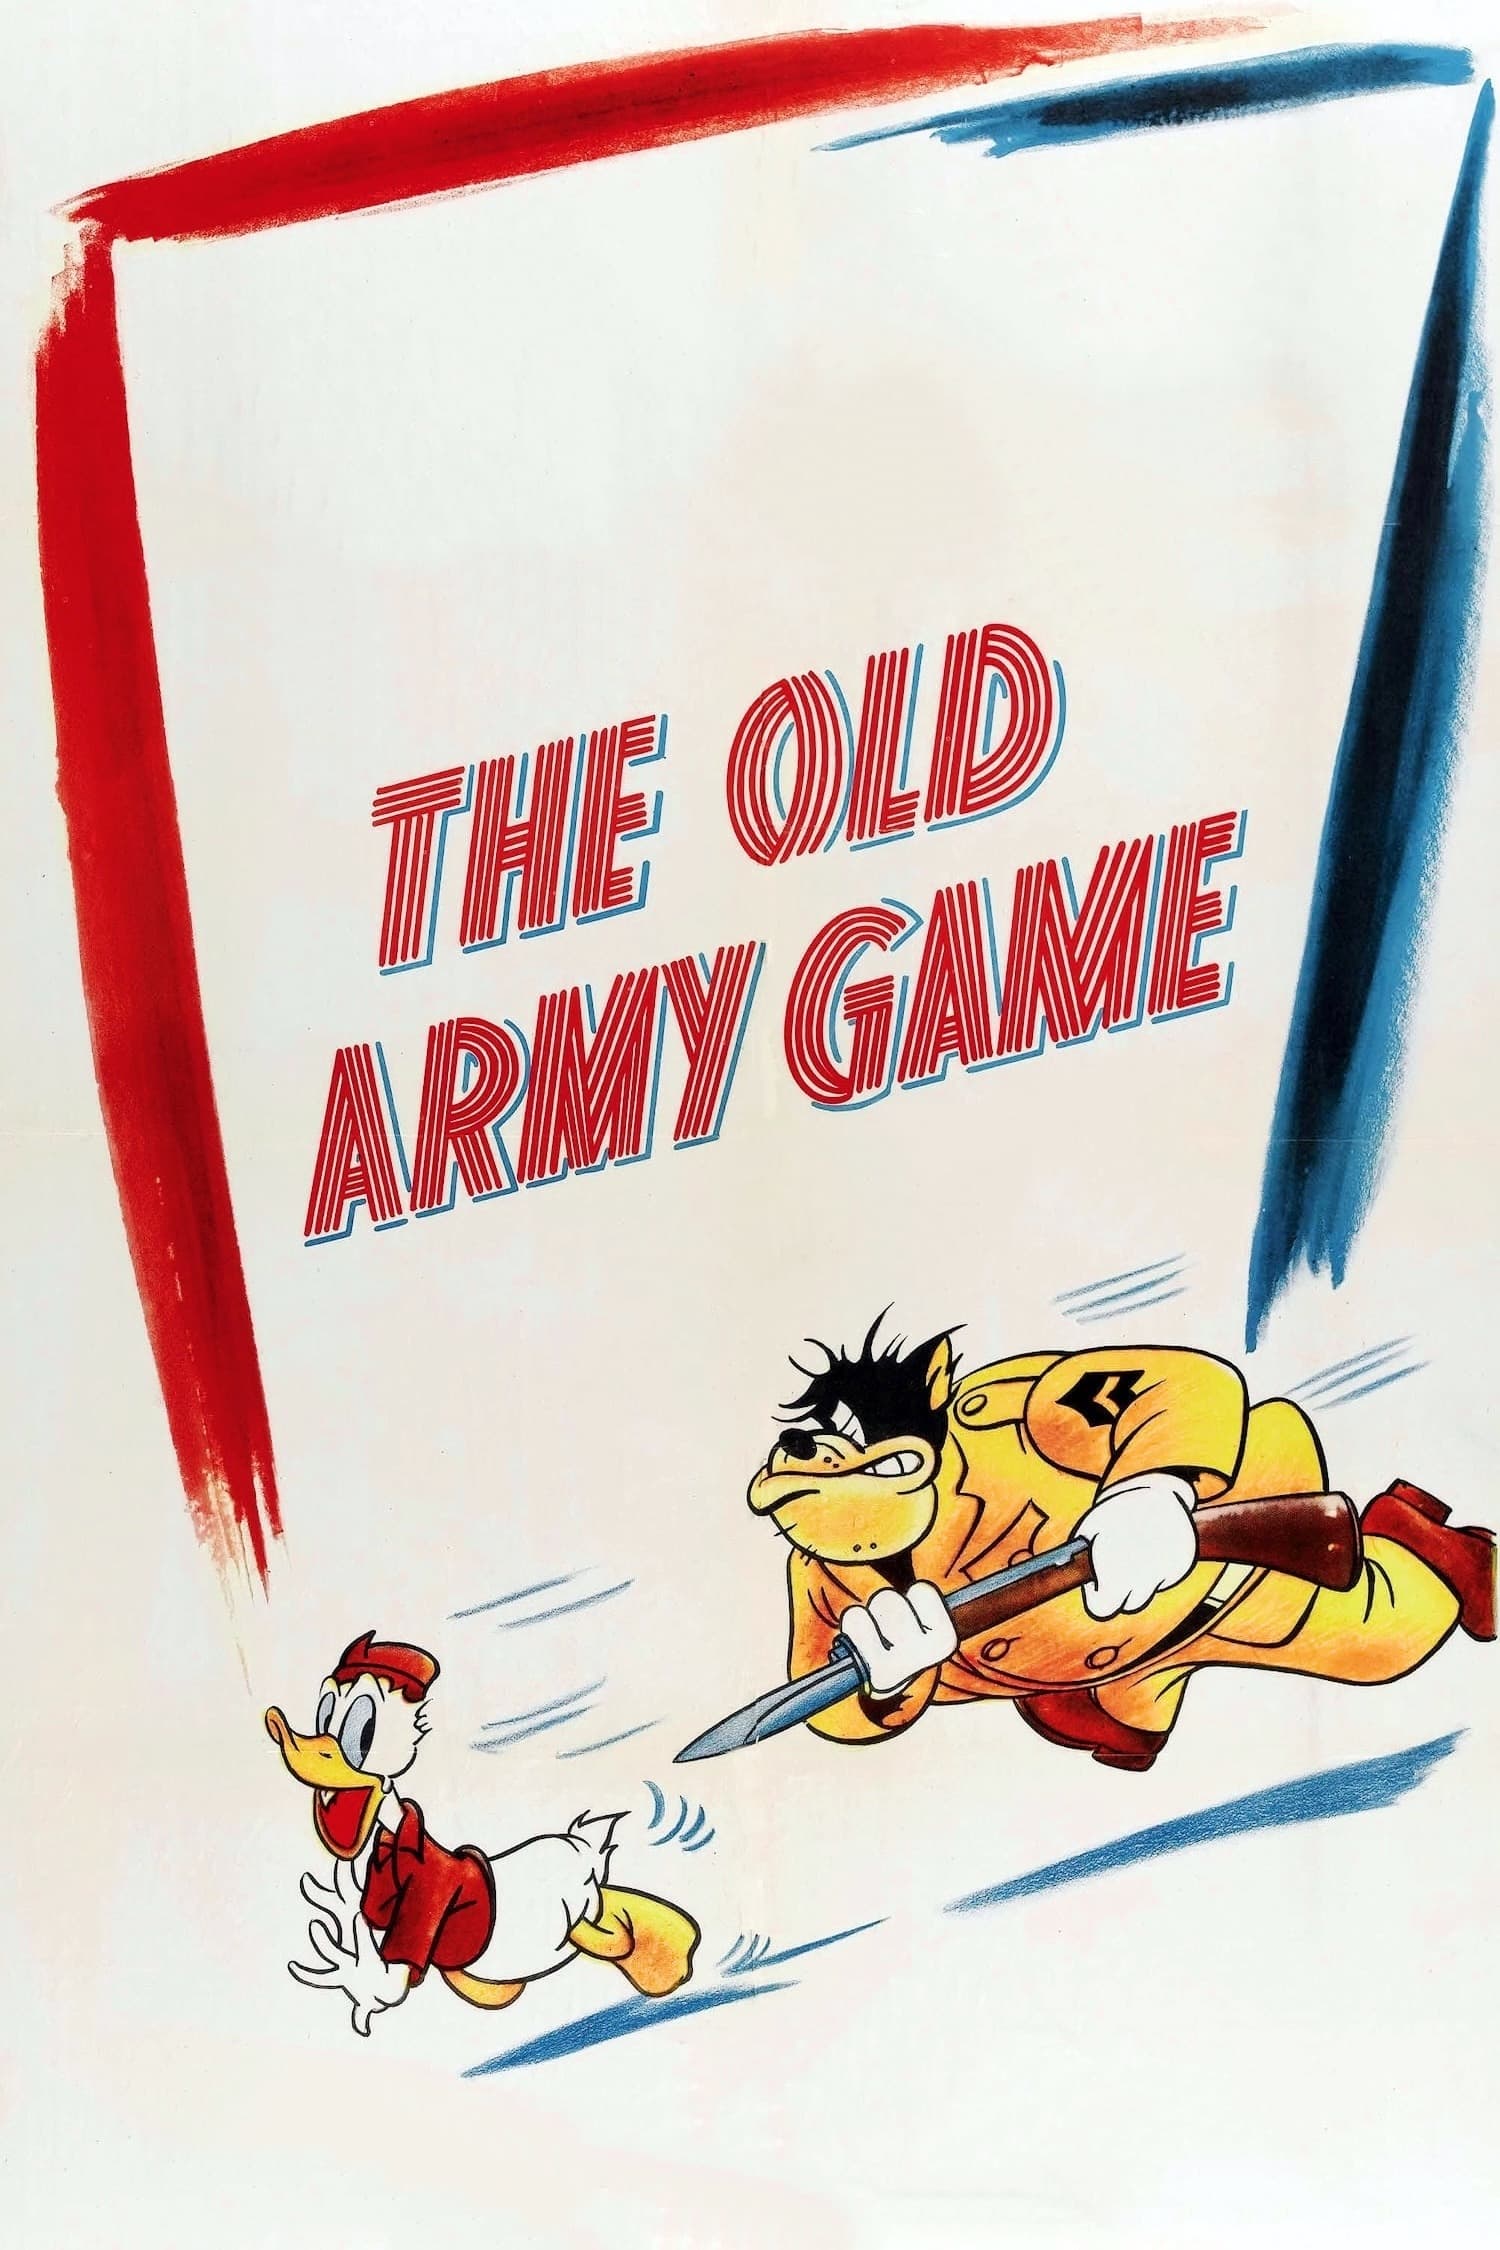 The Old Army Game